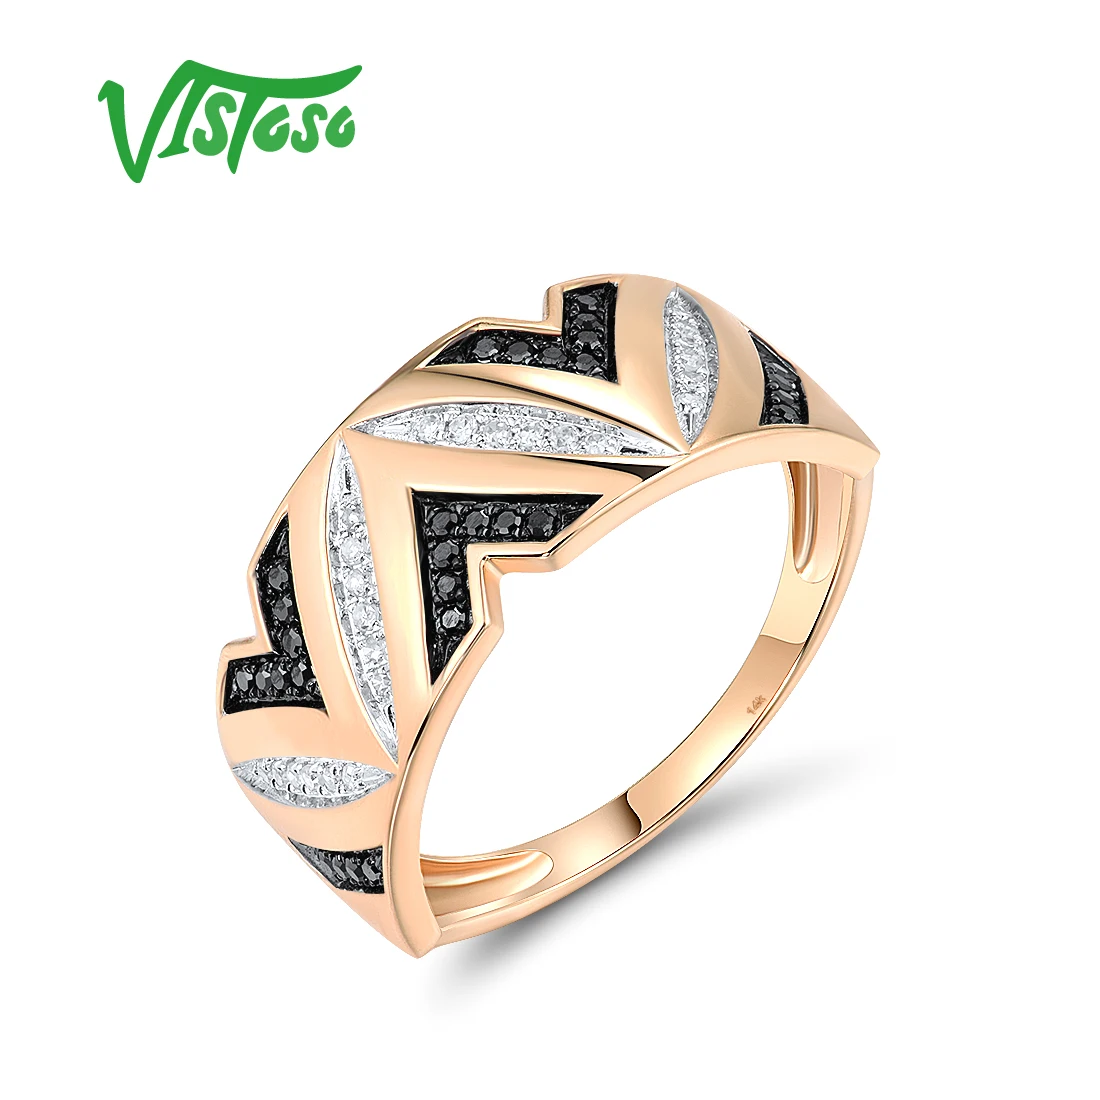 

VISTOSO Pure 14K 585 Yellow Gold Band Ring For Women Sparkling White & Black Diamonds Fantastic Wedding Party Fine Jewelry